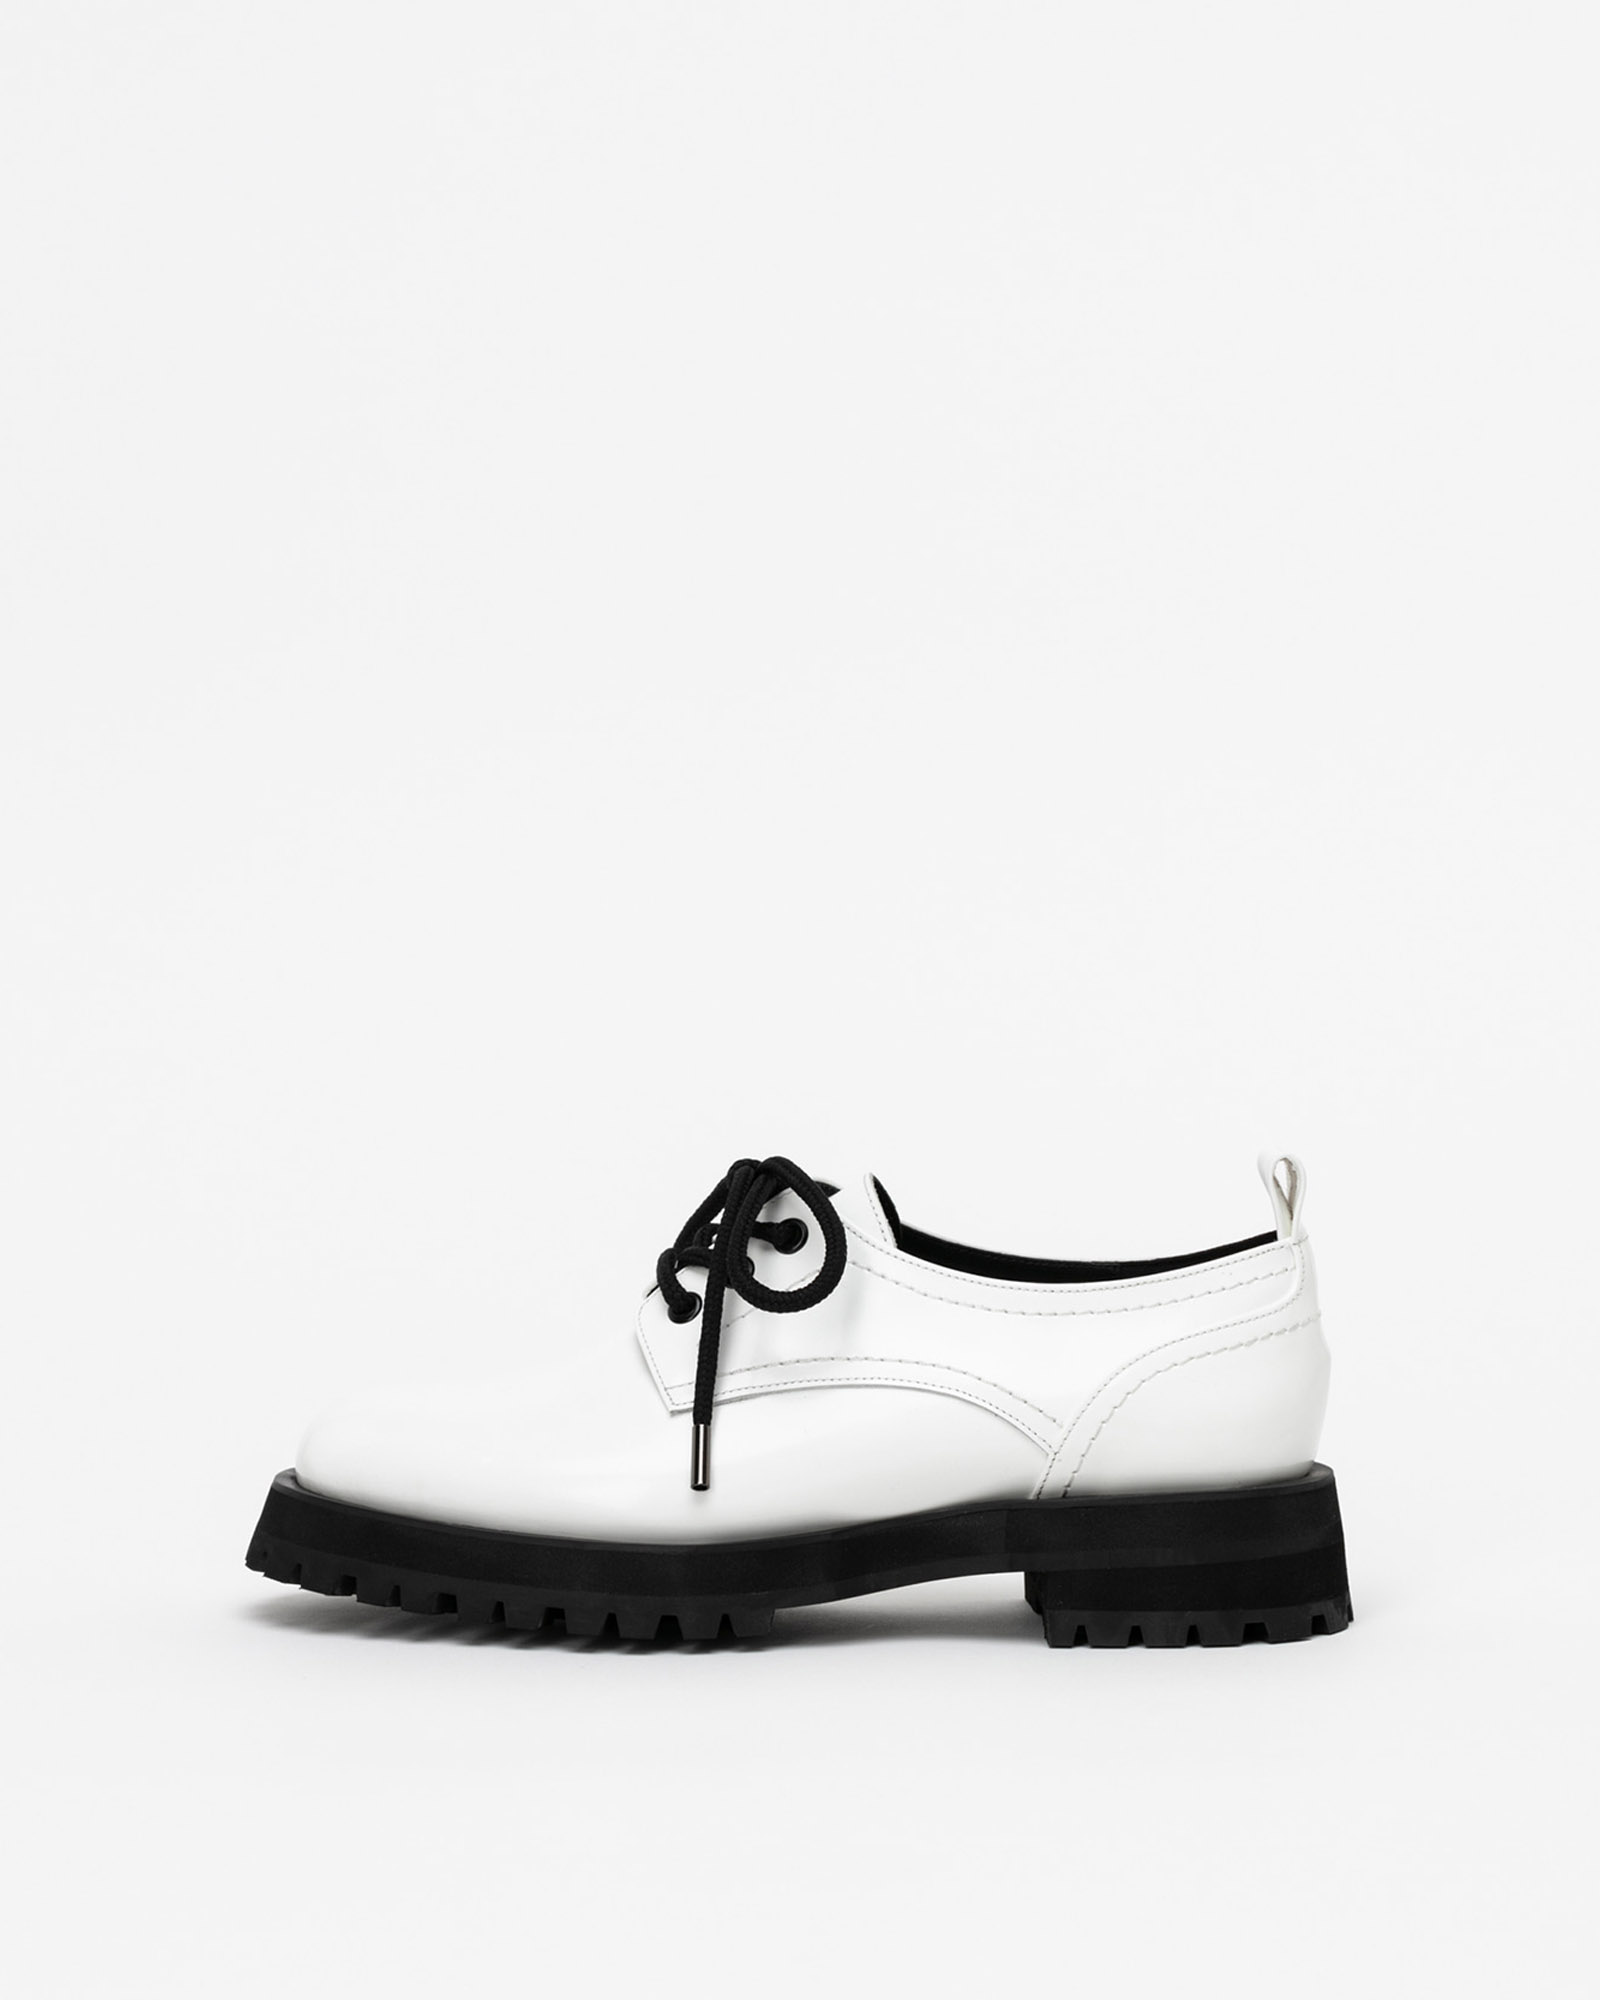 Aleta Lug-sole Lace-up Loafers in White Box